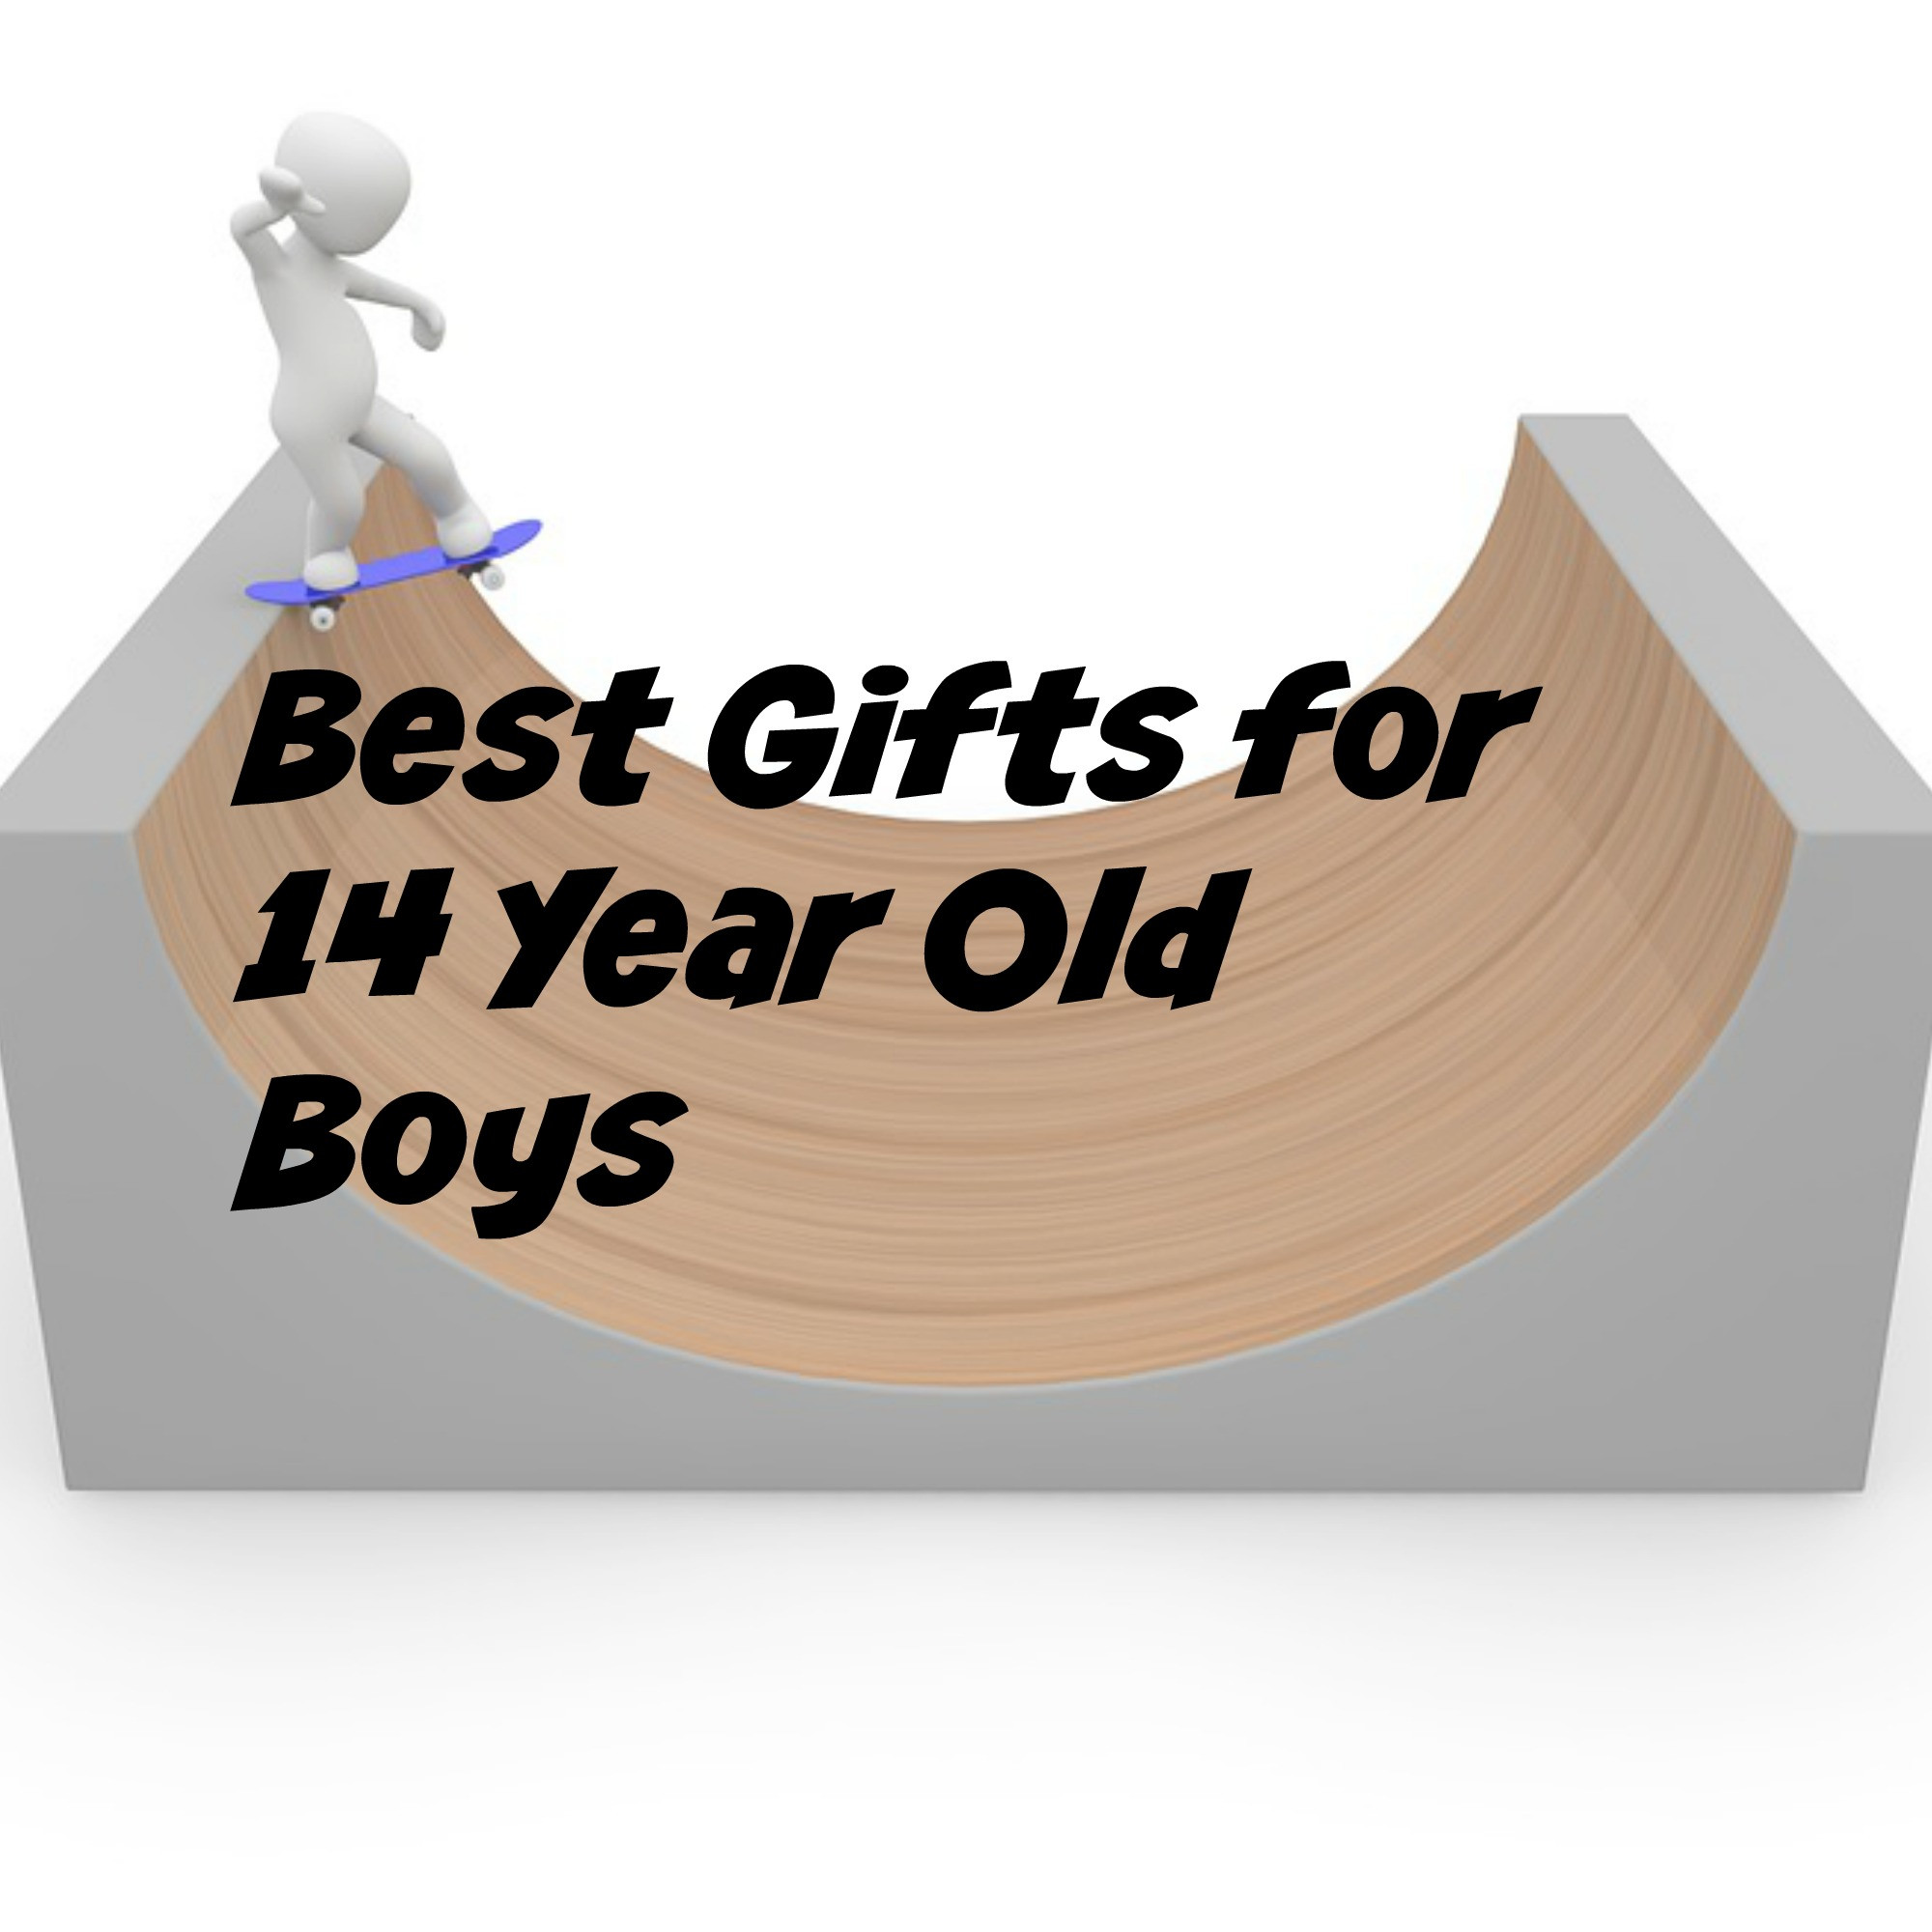 Gift Ideas For Boys Age 14
 Best Gifts for 14 Year Old Boys Birthdays and Christmas